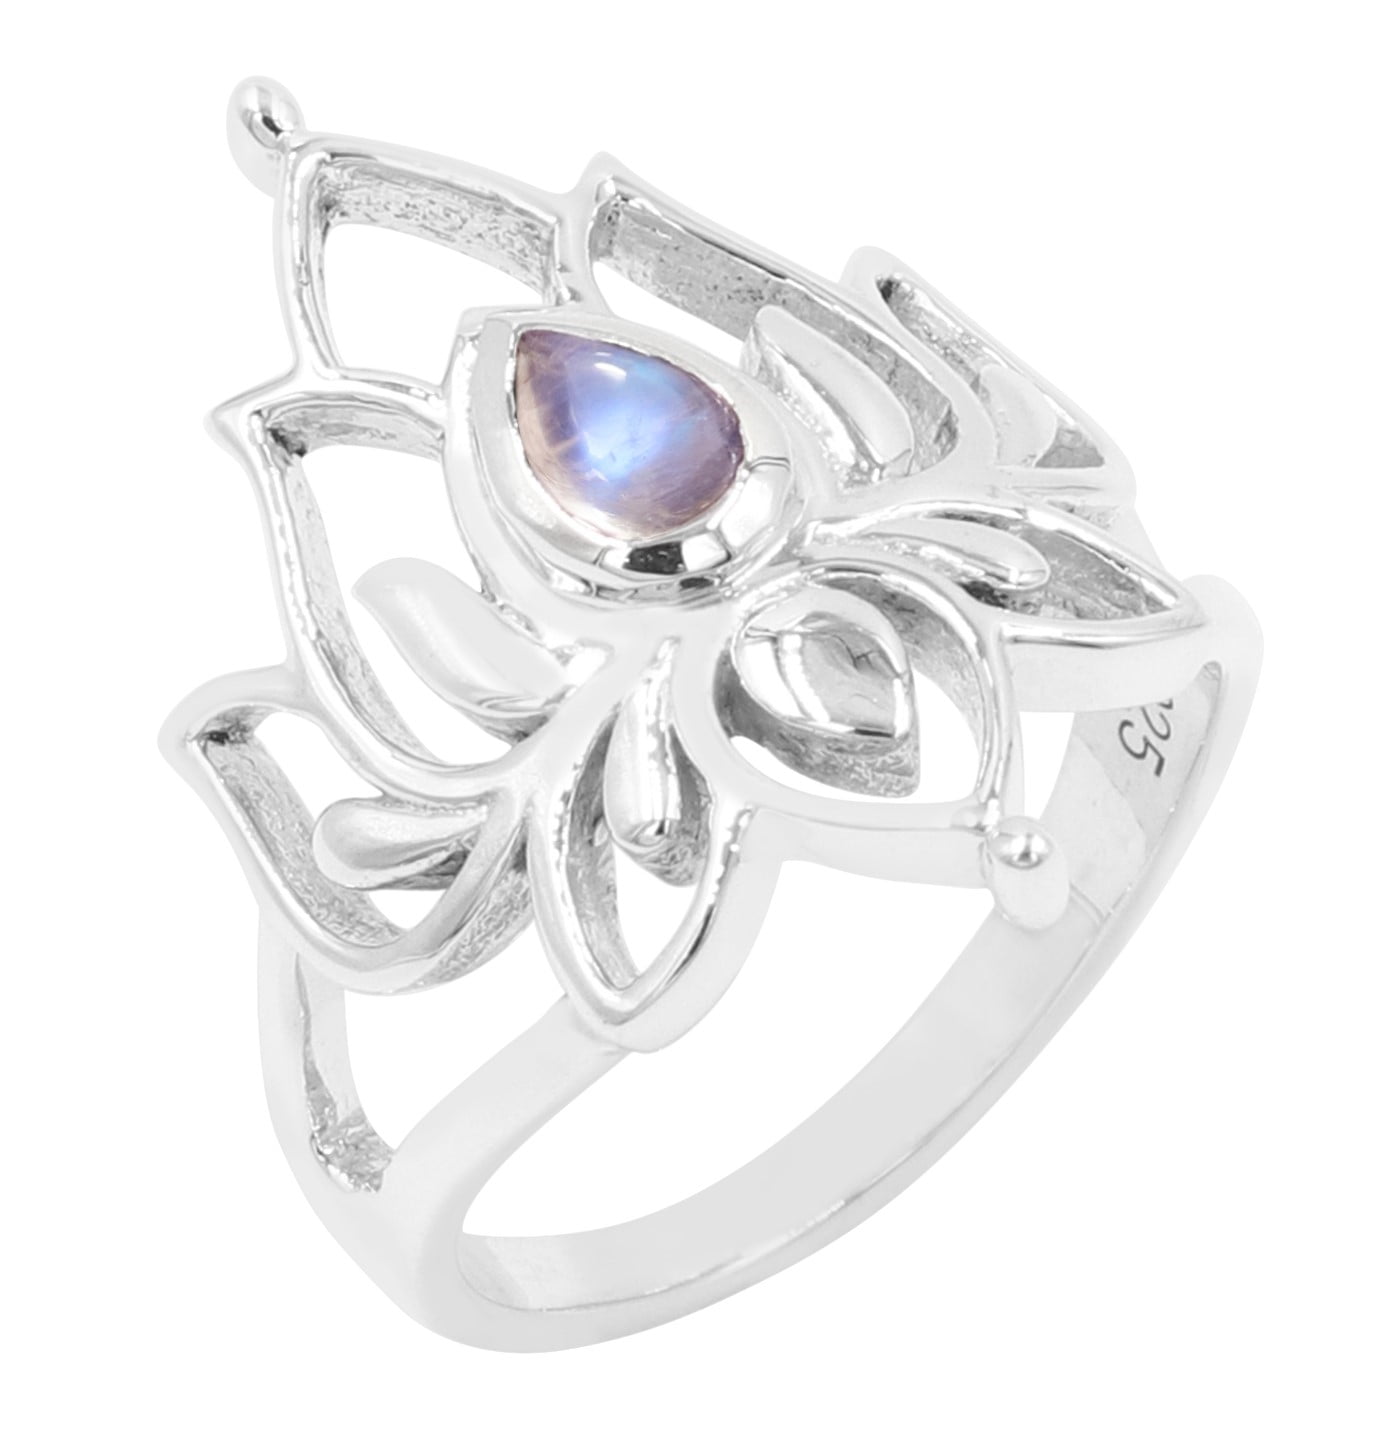 Earth Gems Jewelry Moonstone Ring Sterling Silver Rings Lotus Design Ring Statement Ring for Women a9ad6316 f983 4651 915f f2f57a7fffb0.c110992a0764bae66a5ad74606b4f3fc